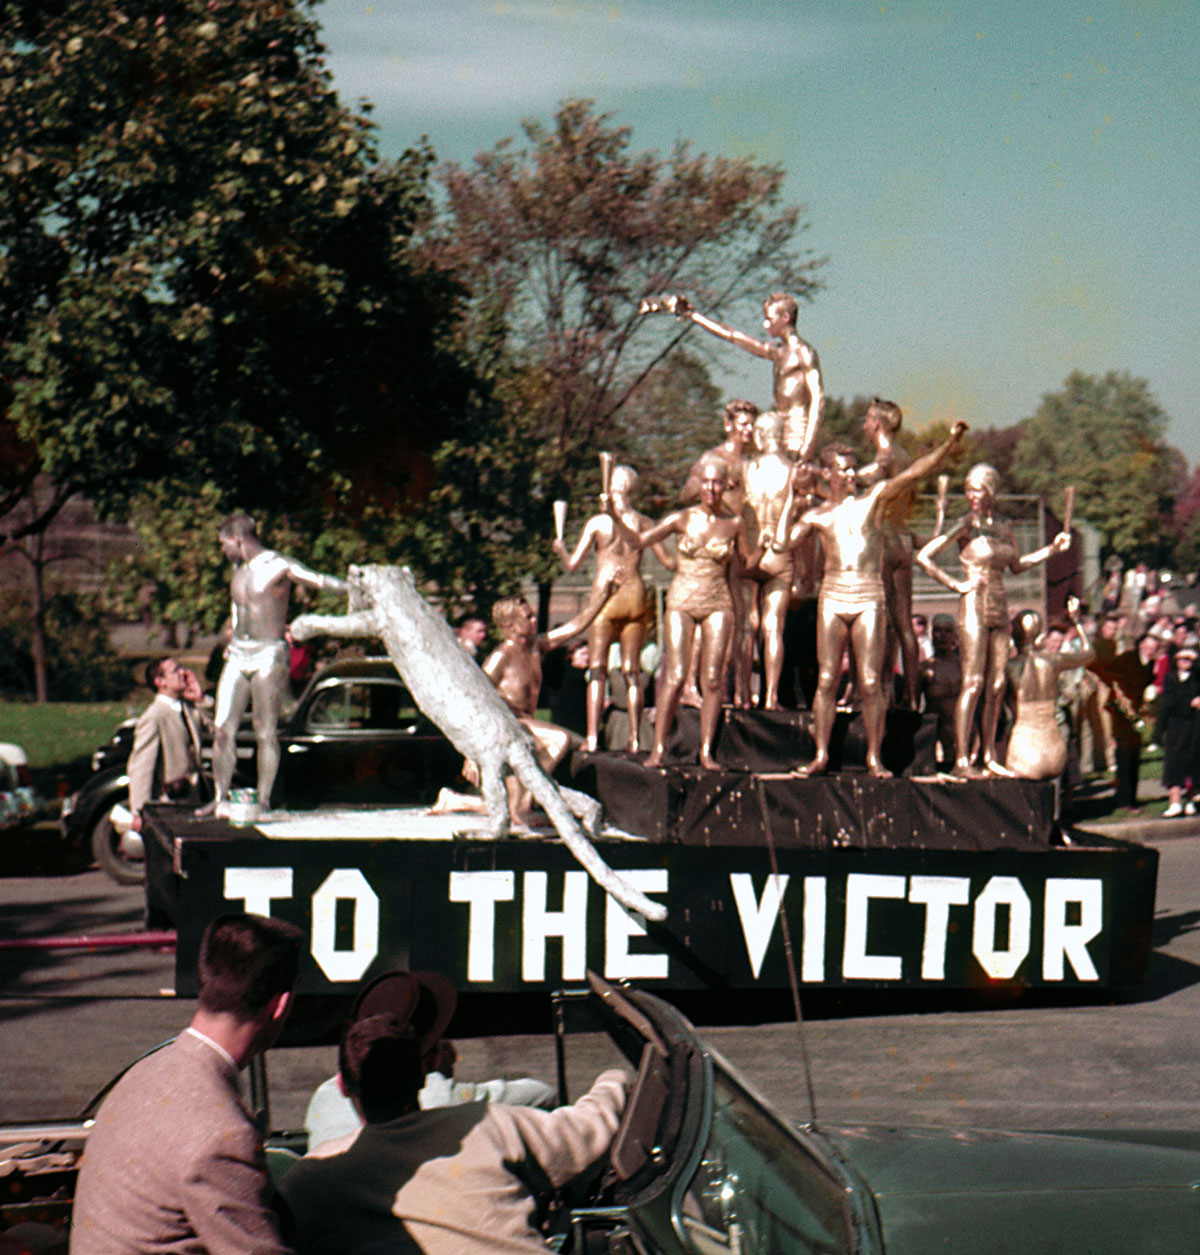 Members of Tau Kappa Epsilon and Kappa Kappa Gamma dazzle on their first-place Homecoming float in 1954.